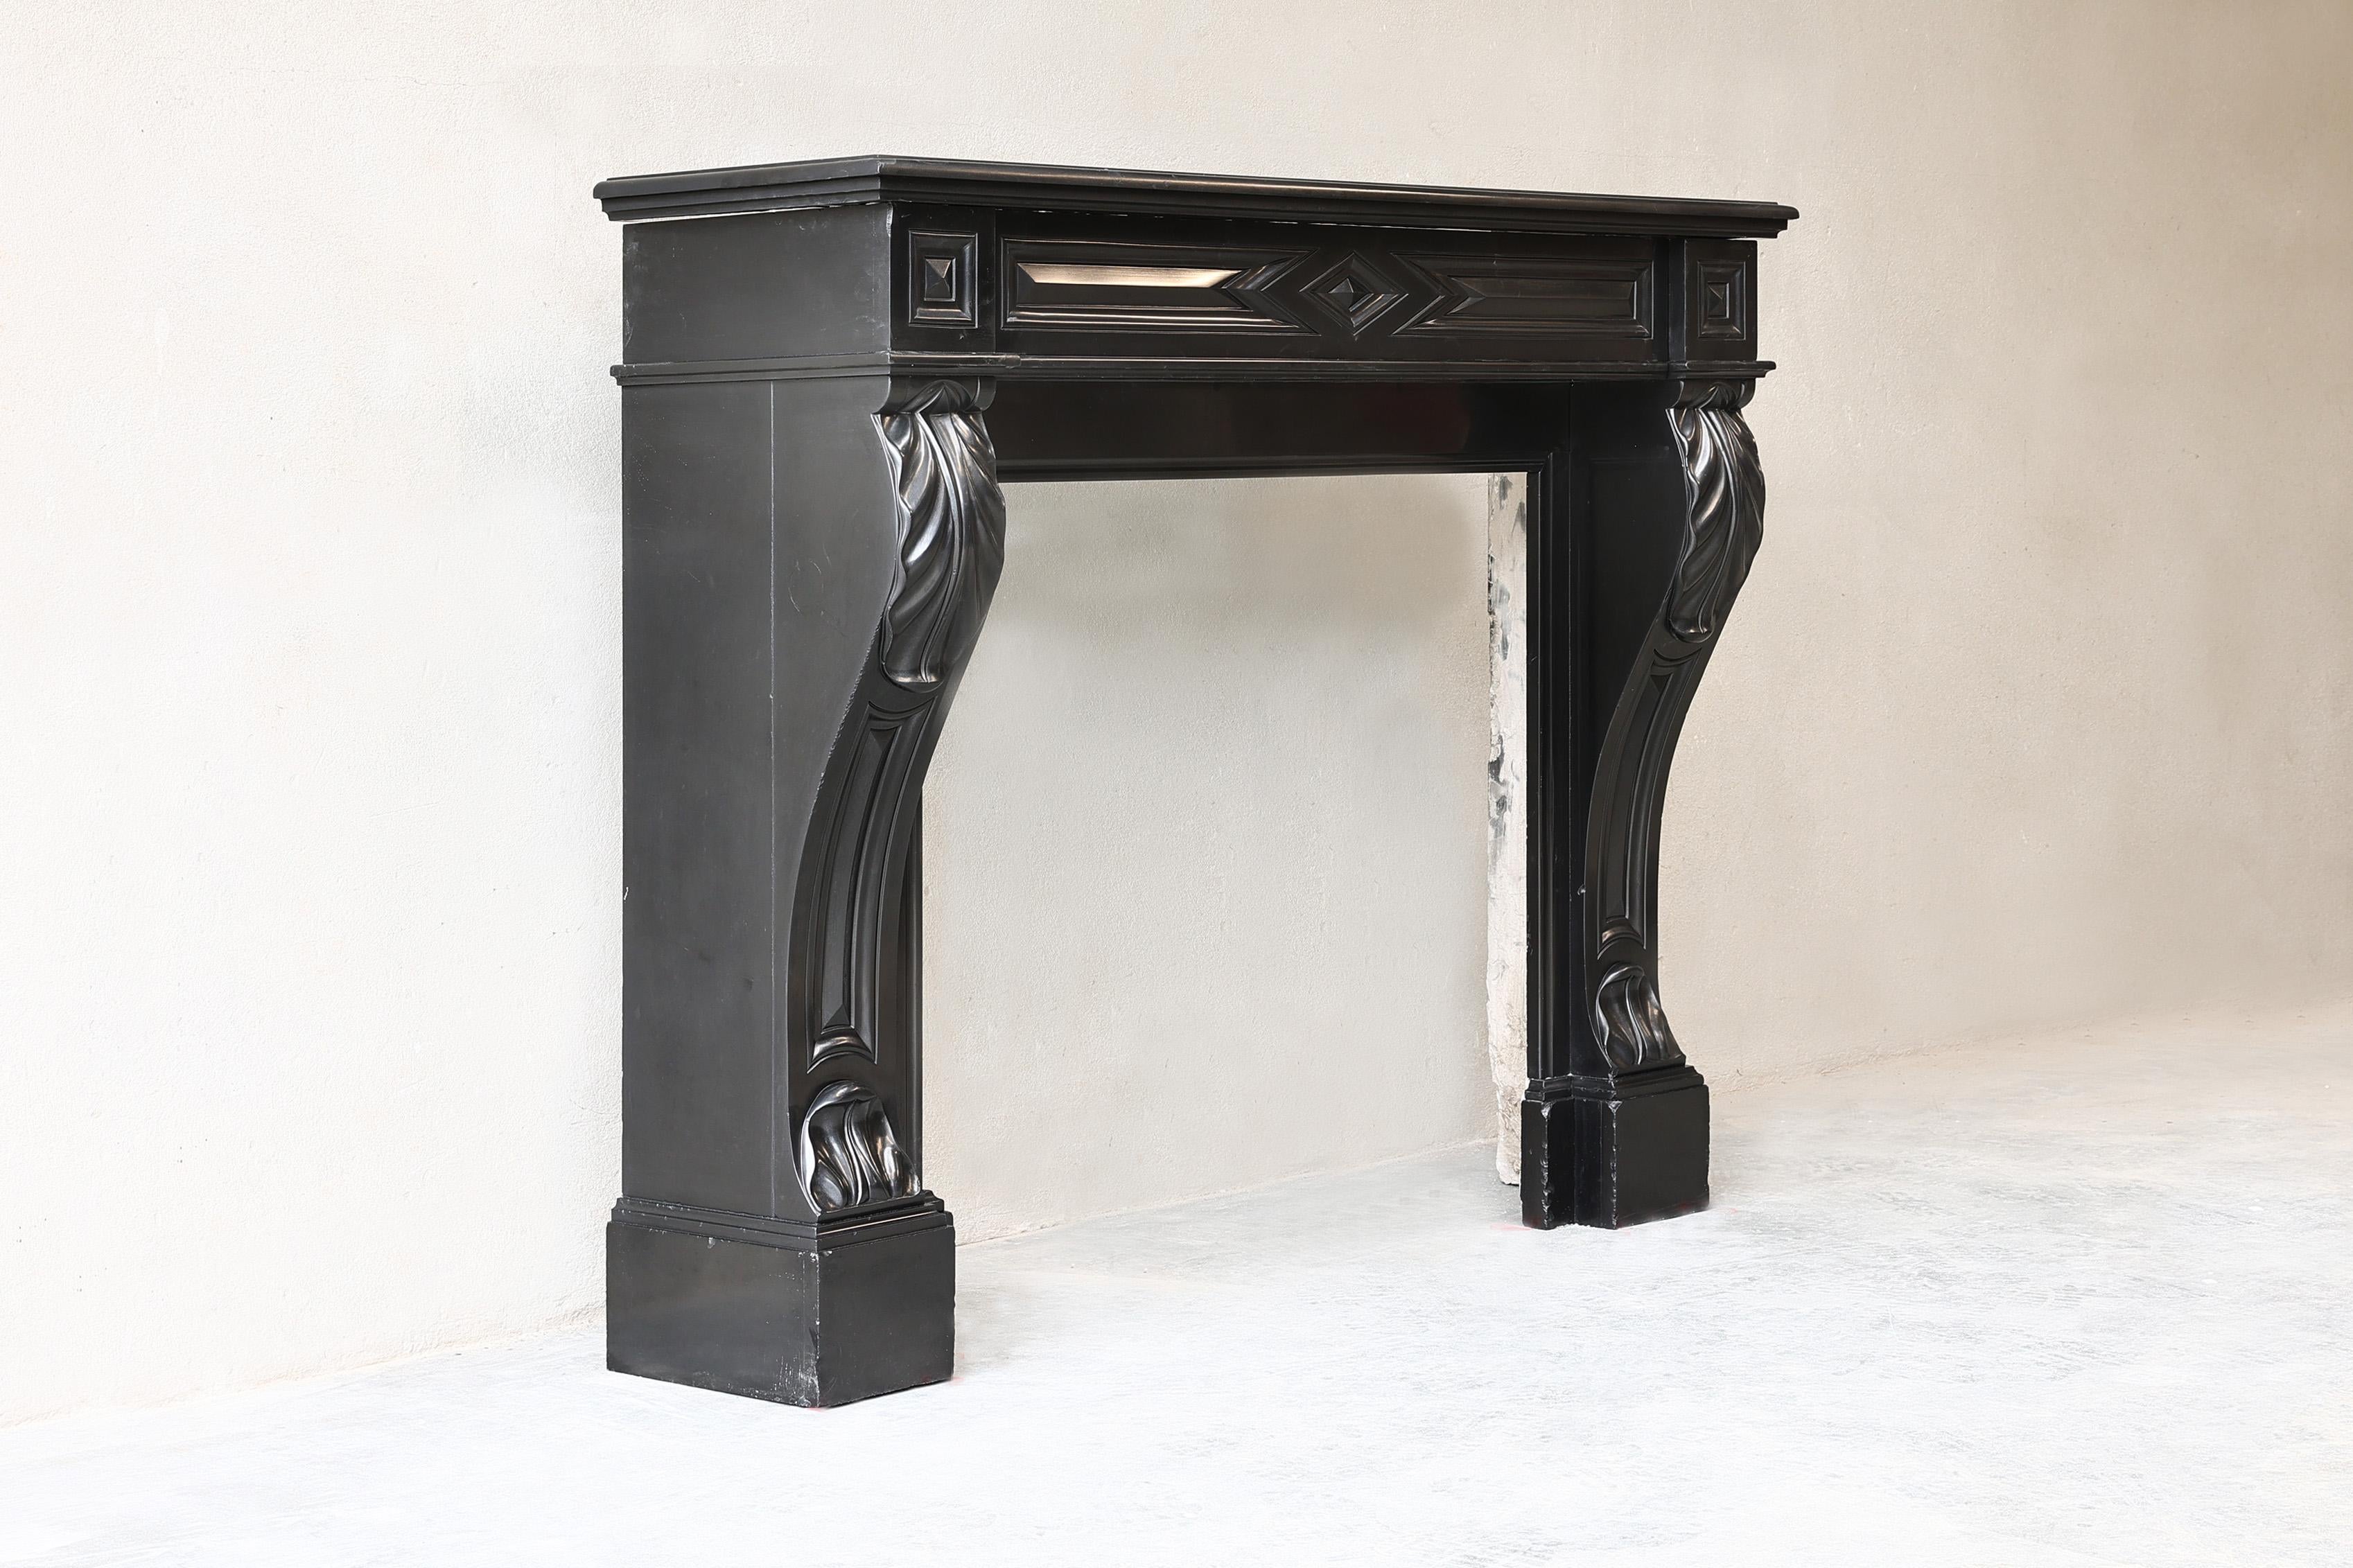 Beautiful antique mantelpiece made of Noir de Mazy marble with beautiful curves and ornaments. This mantelpiece dates from the 19th century and is in the style of Louis XVI. A black mantelpiece always looks chic and is certainly applicable to this